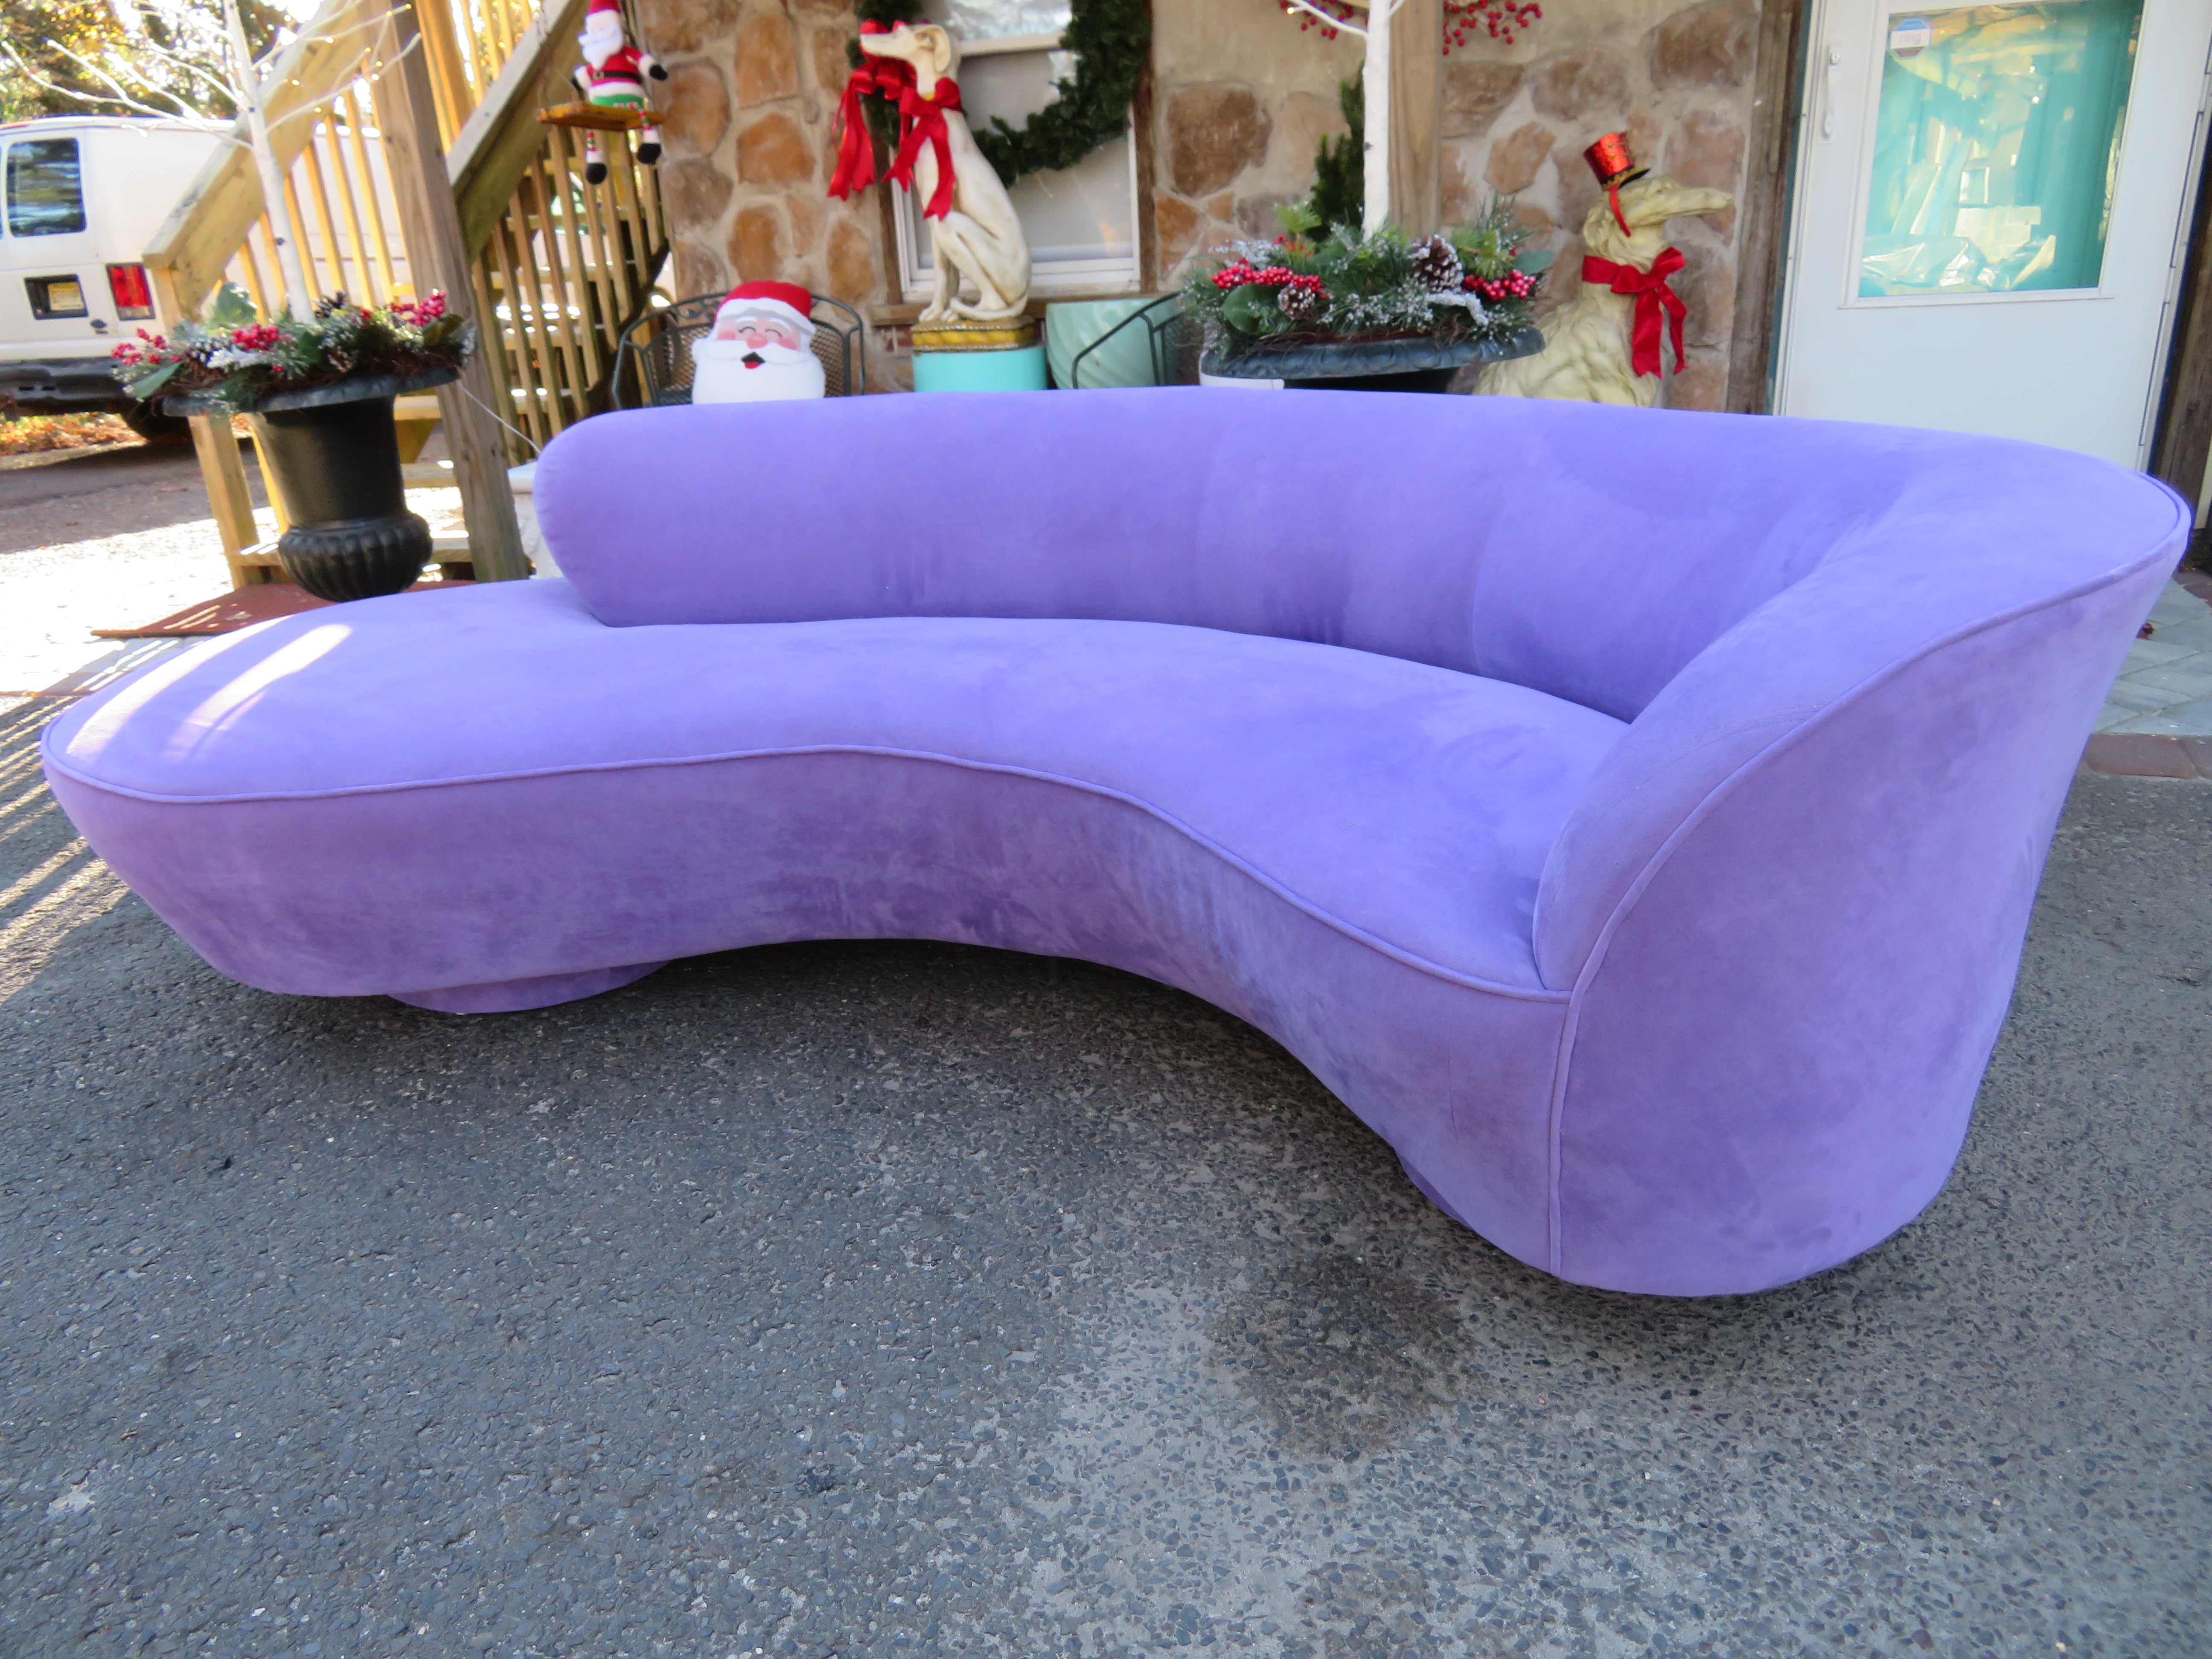 Fabulous vintage cloud sofa by Vladimir Kagan for directional with desired lucite support. Sofa retains original purple ultra-suede upholstery which presents very well.